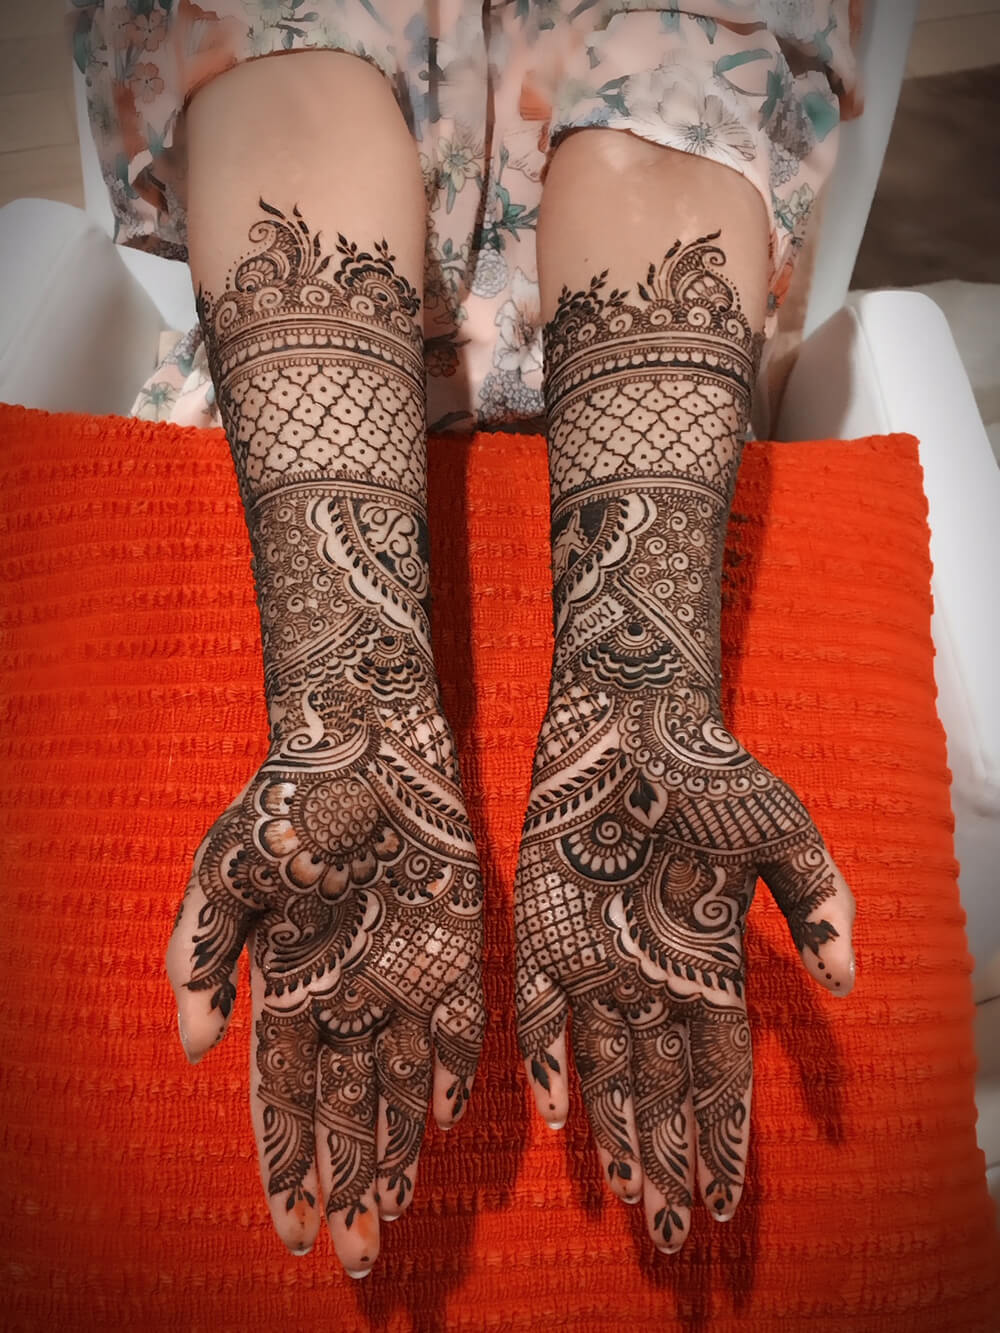 TYPES OF BRIDAL MEHNDI ELEMENTS BRIDE AND GROOM FACES | HENNA MEHNDI FOR  BEGINNERS - YouTube | Mehndi designs book, Wedding mehndi designs, Bridal  mehndi designs